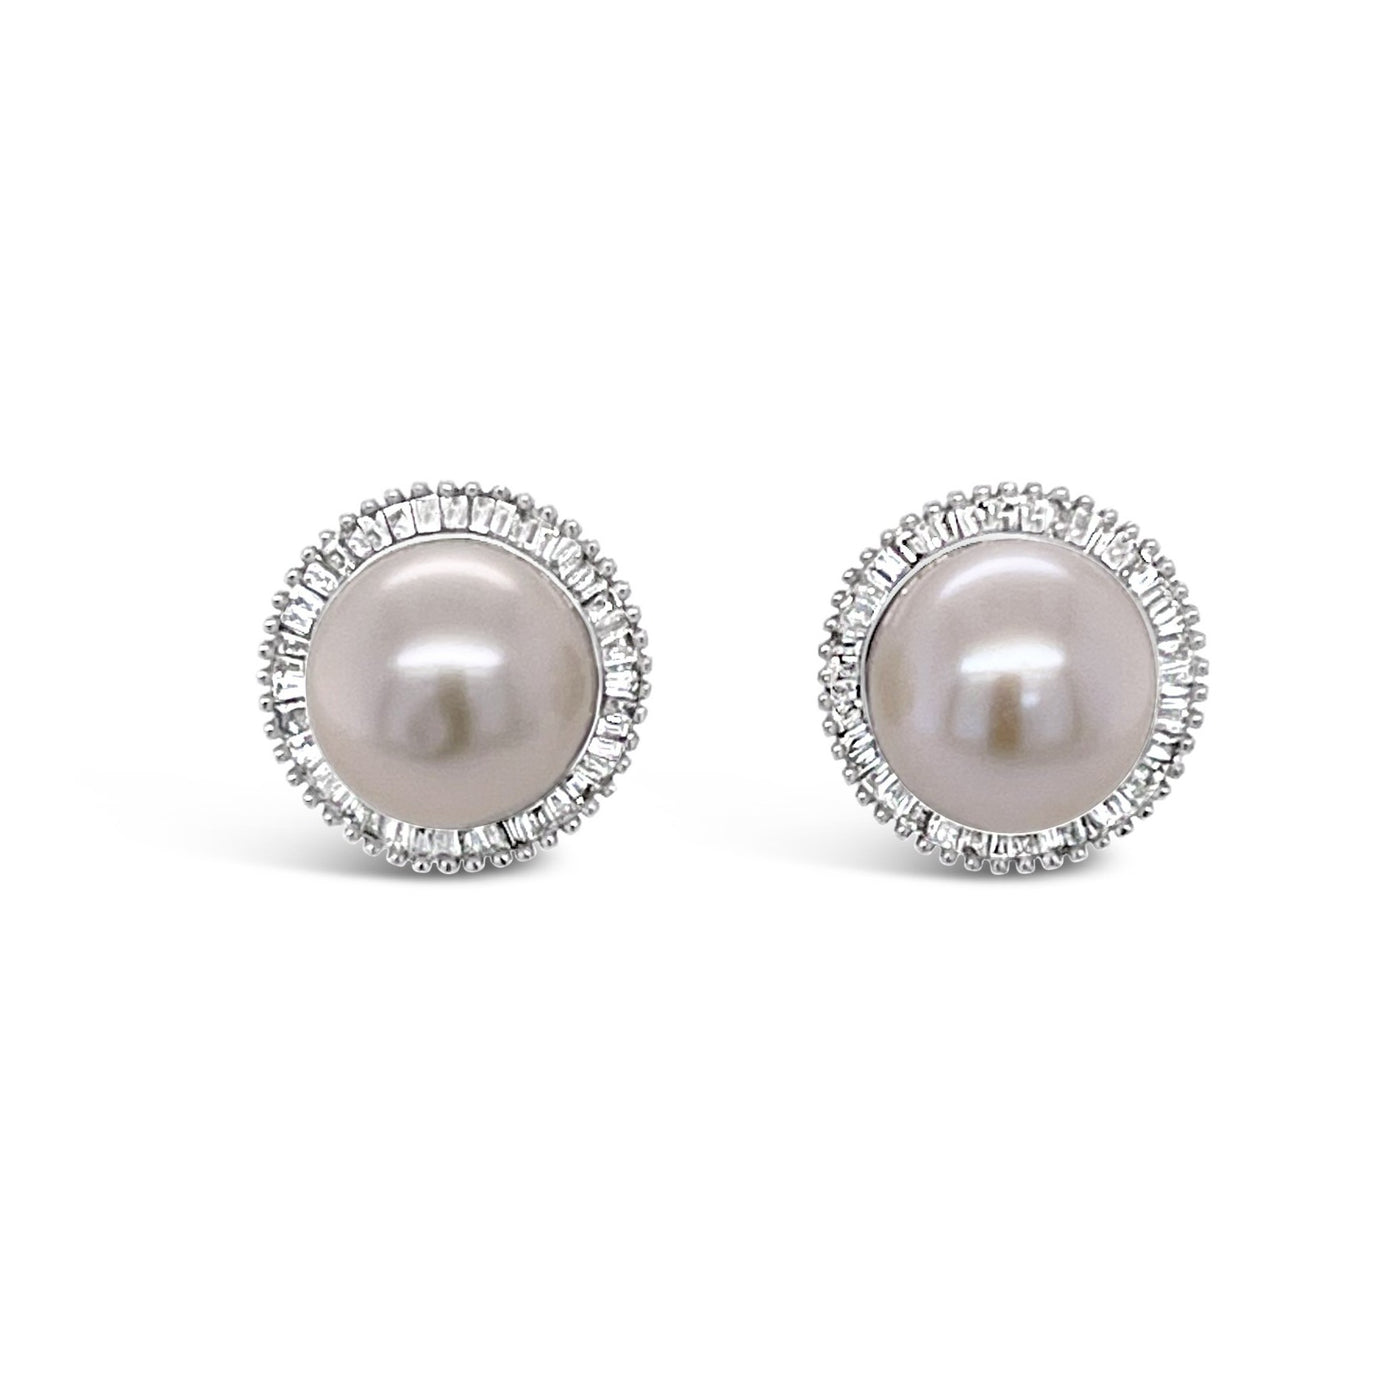 18CT White Gold Pearl and Diamond Stud Earrings